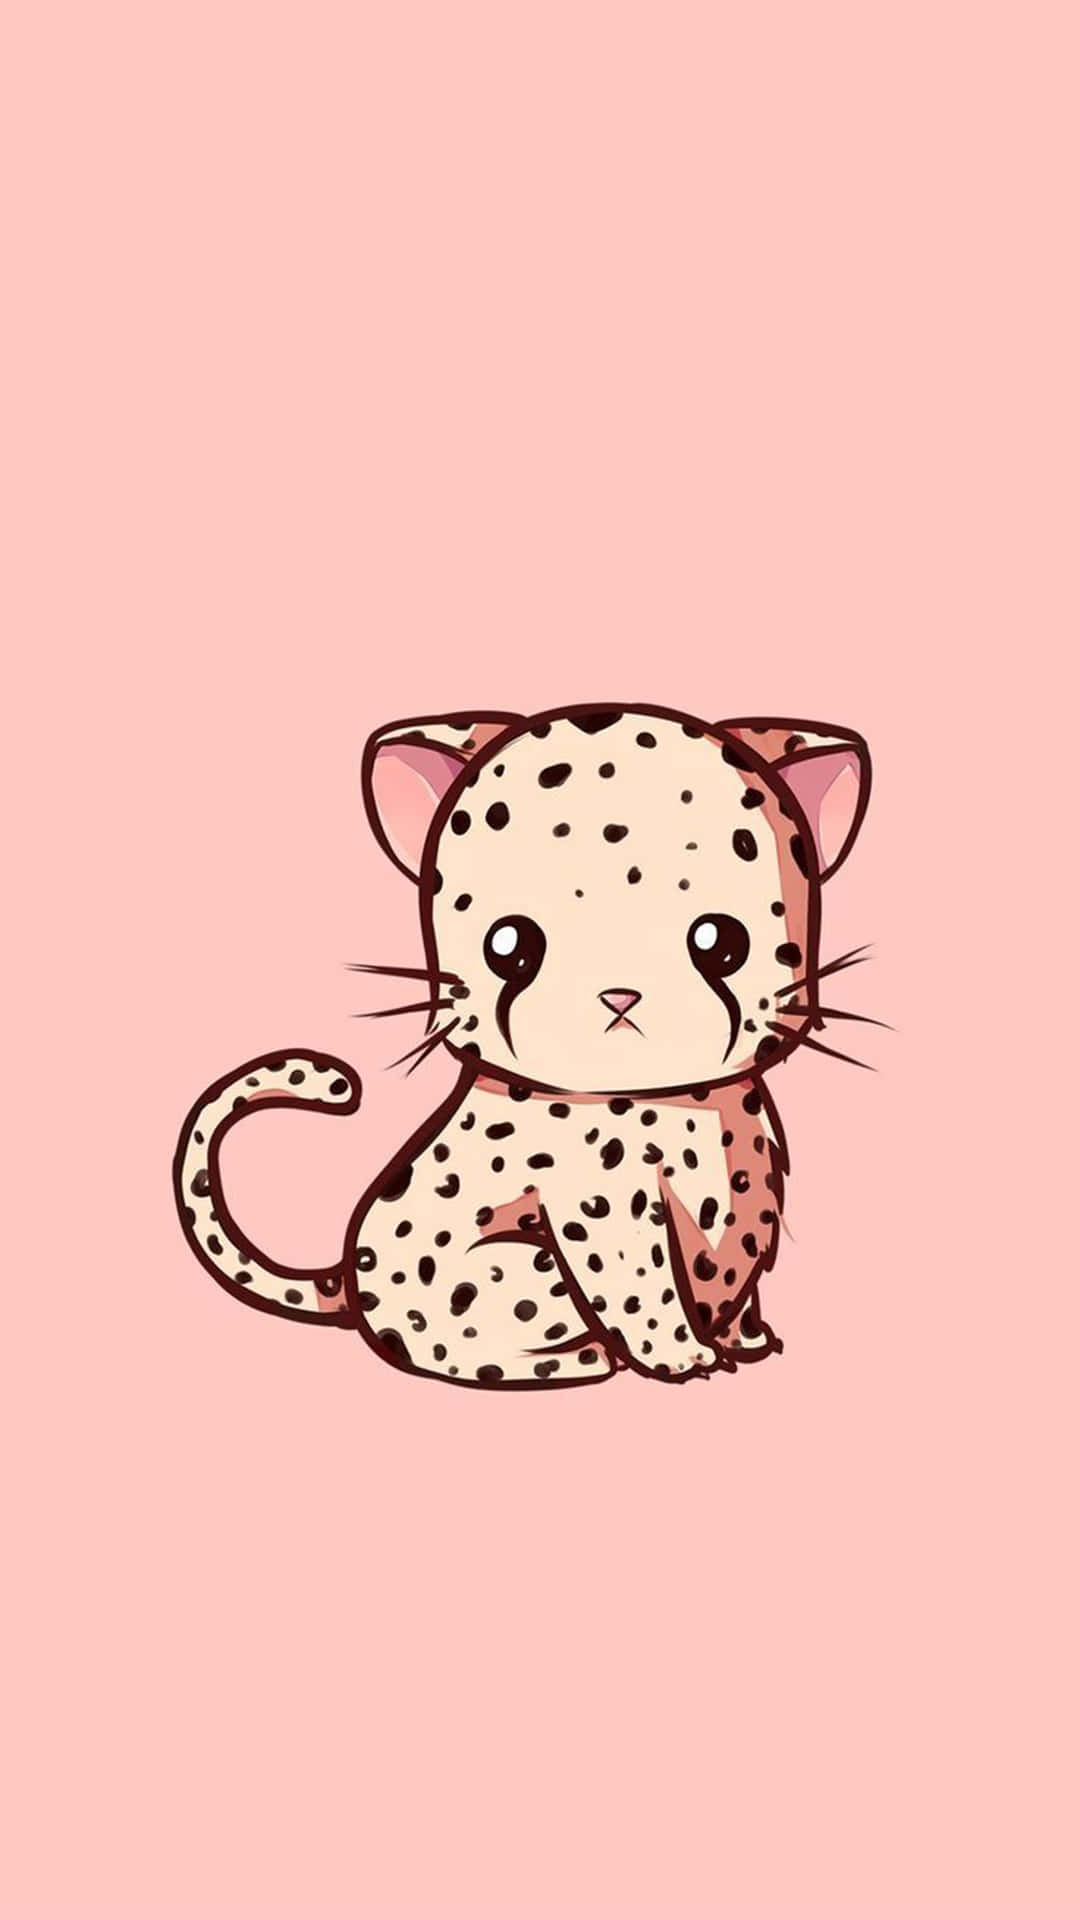 A Cute Leopard On A Pink Background Wallpaper